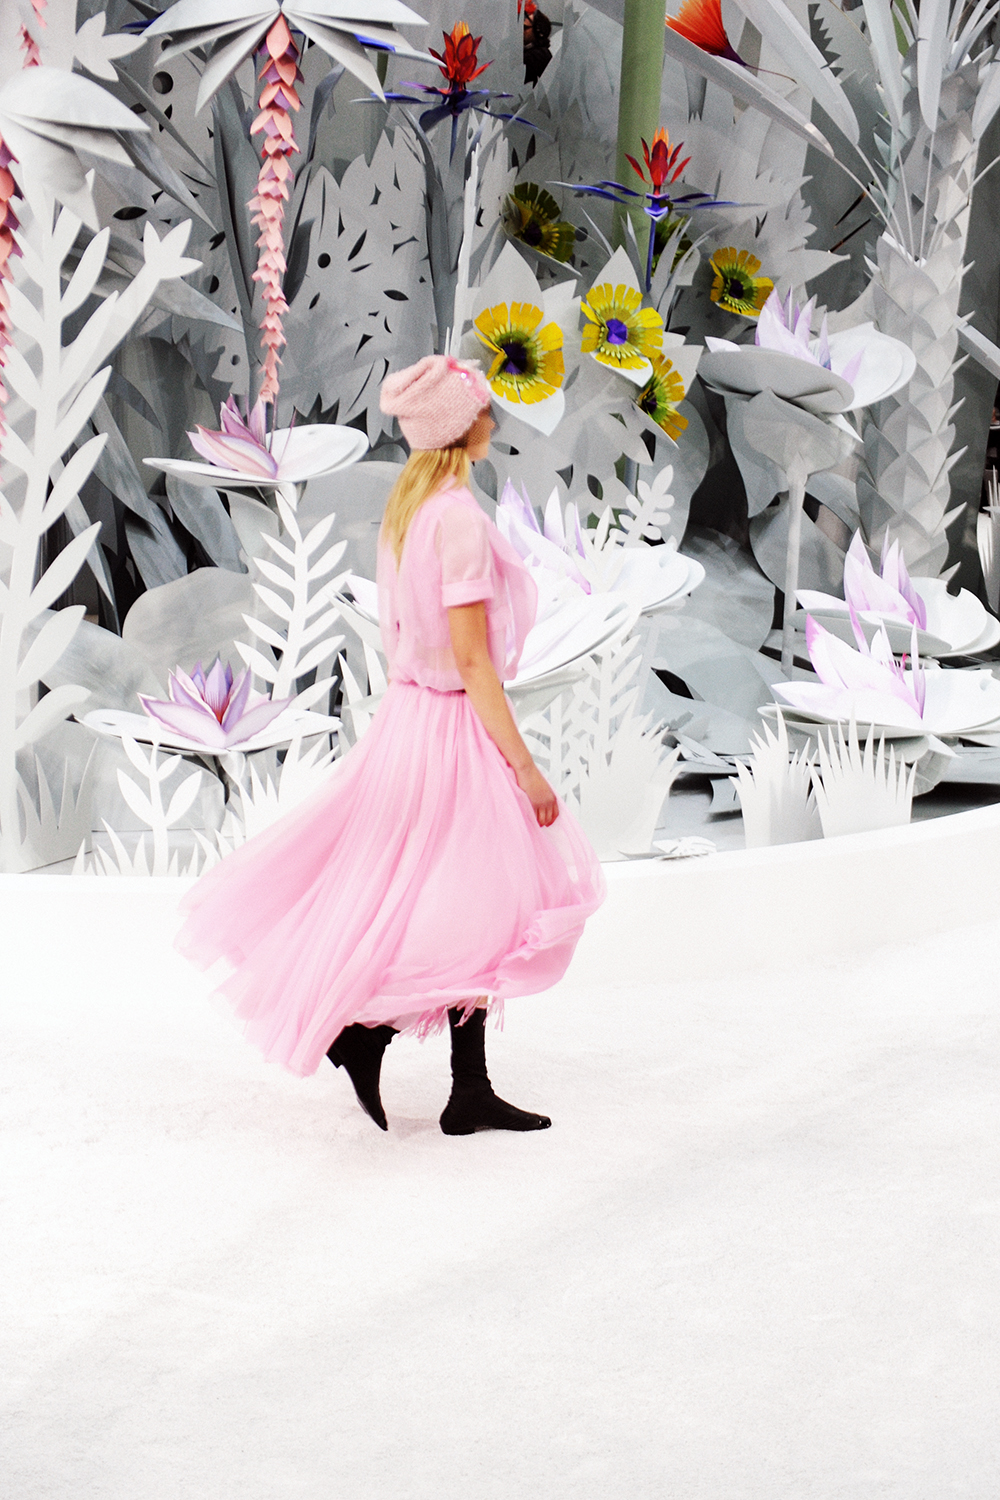 Chanel Haute Couture Spring 2015 - The House That Lars Built